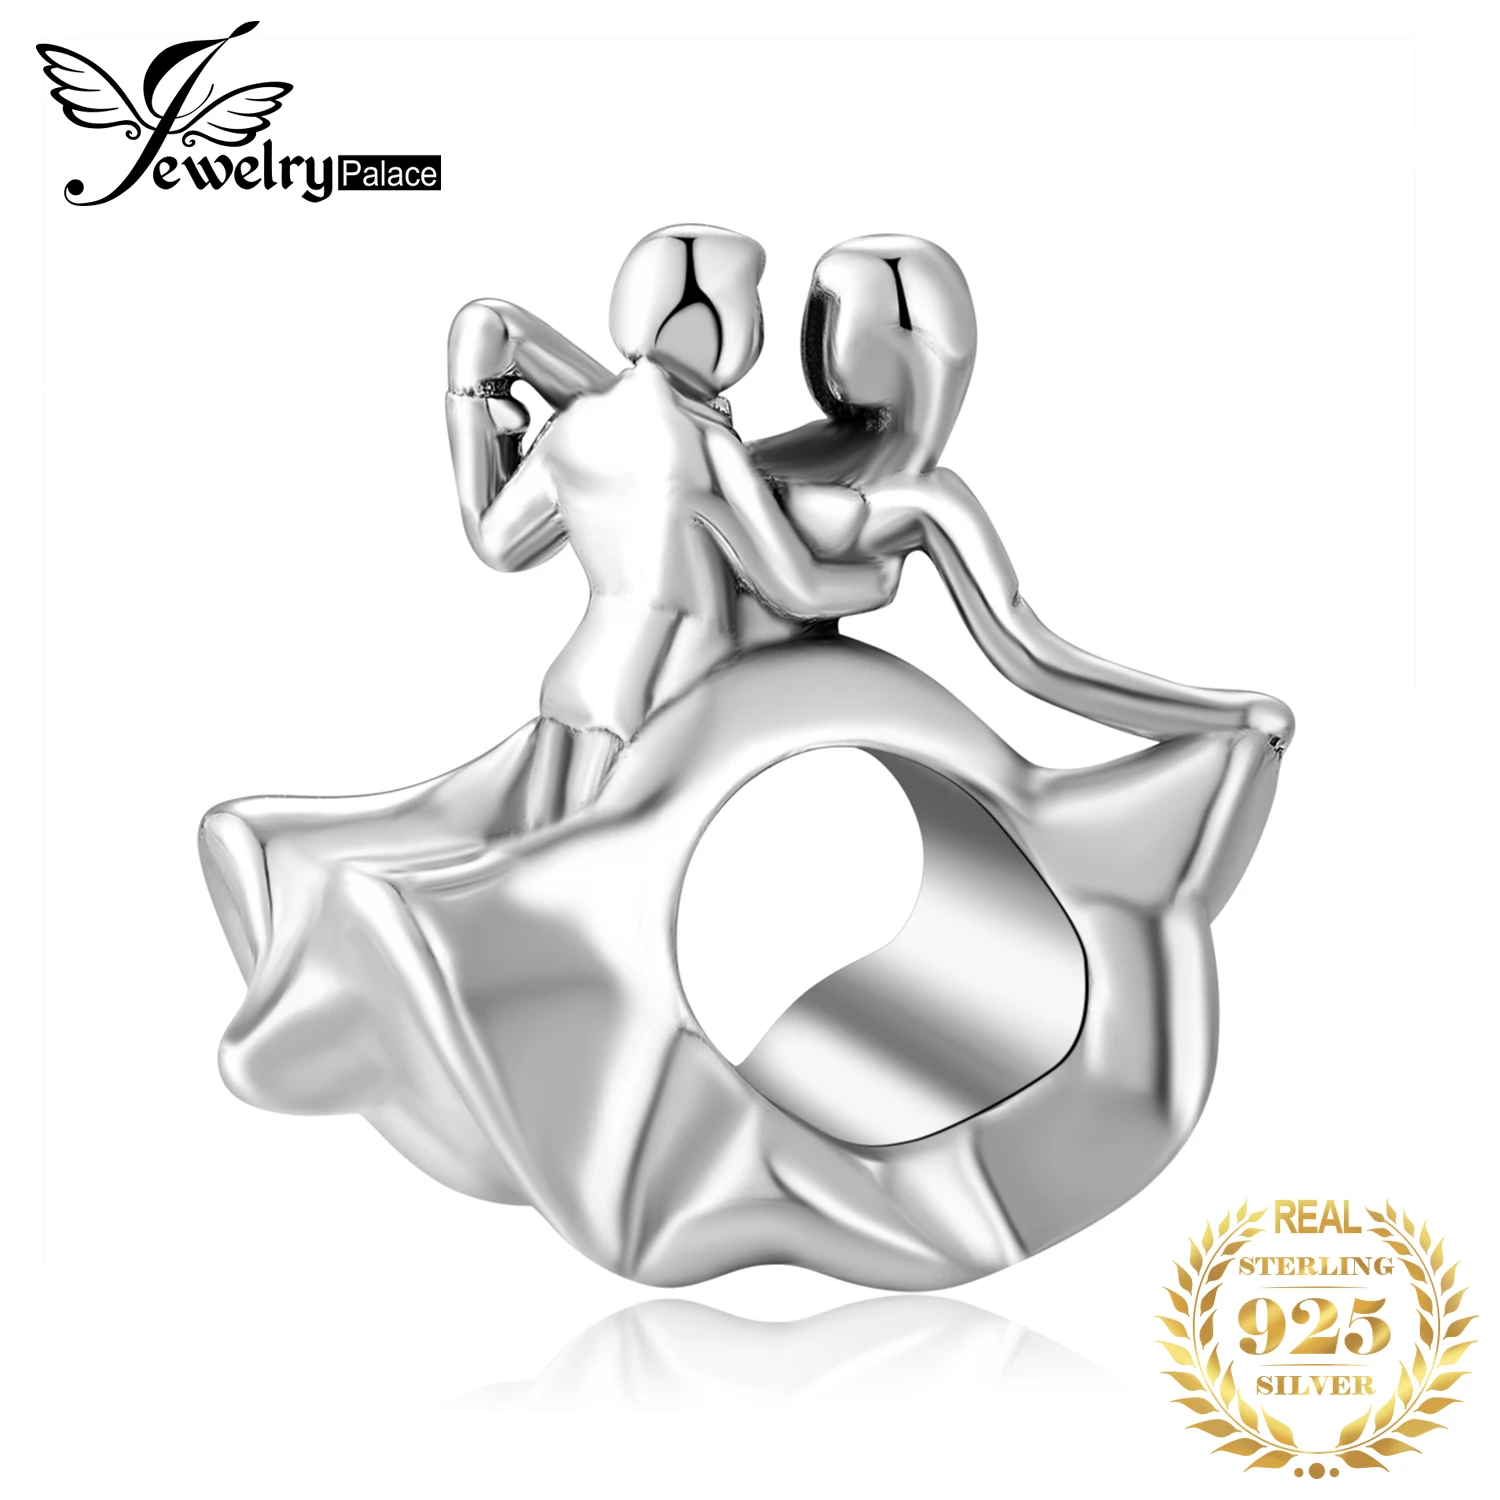 

JewelryPalace Dancing 925 Sterling Silver Bead Charms Silver 925 Original For Bracelet Silver 925 original Beads Jewelry Making